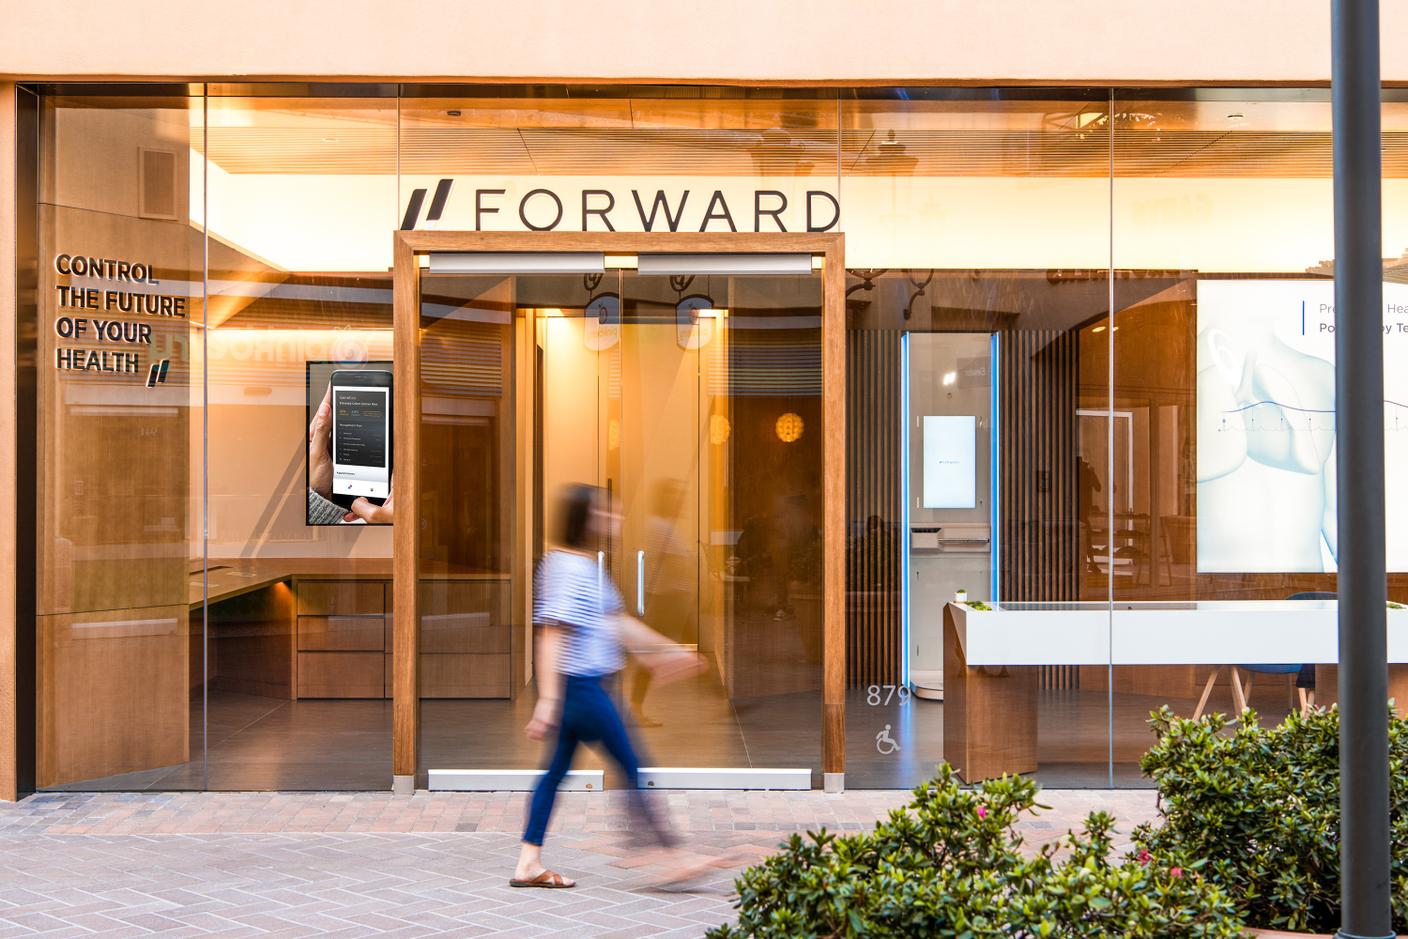 Image showing exterior of a Forward location, a glass building with the Forward logo embedded onto it